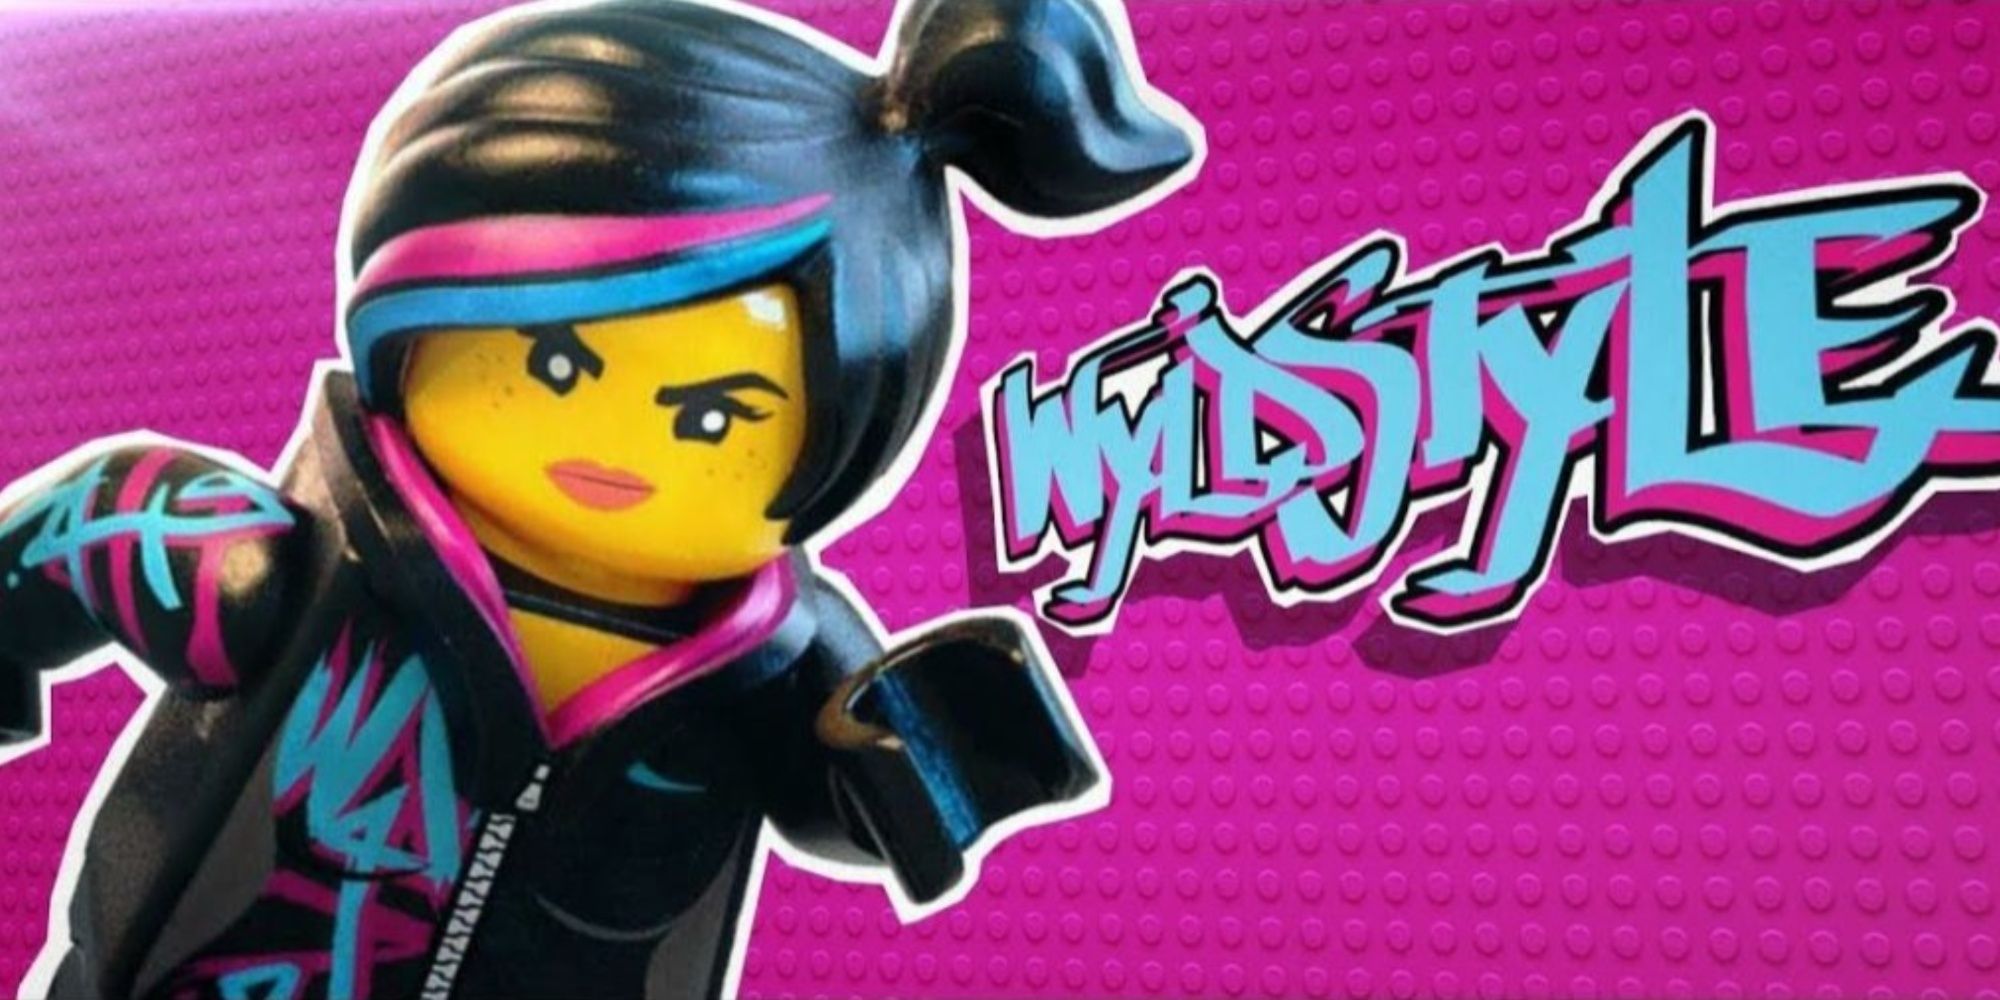 Close-up of the character Wyldstyle from a title card from The Lego Movie.